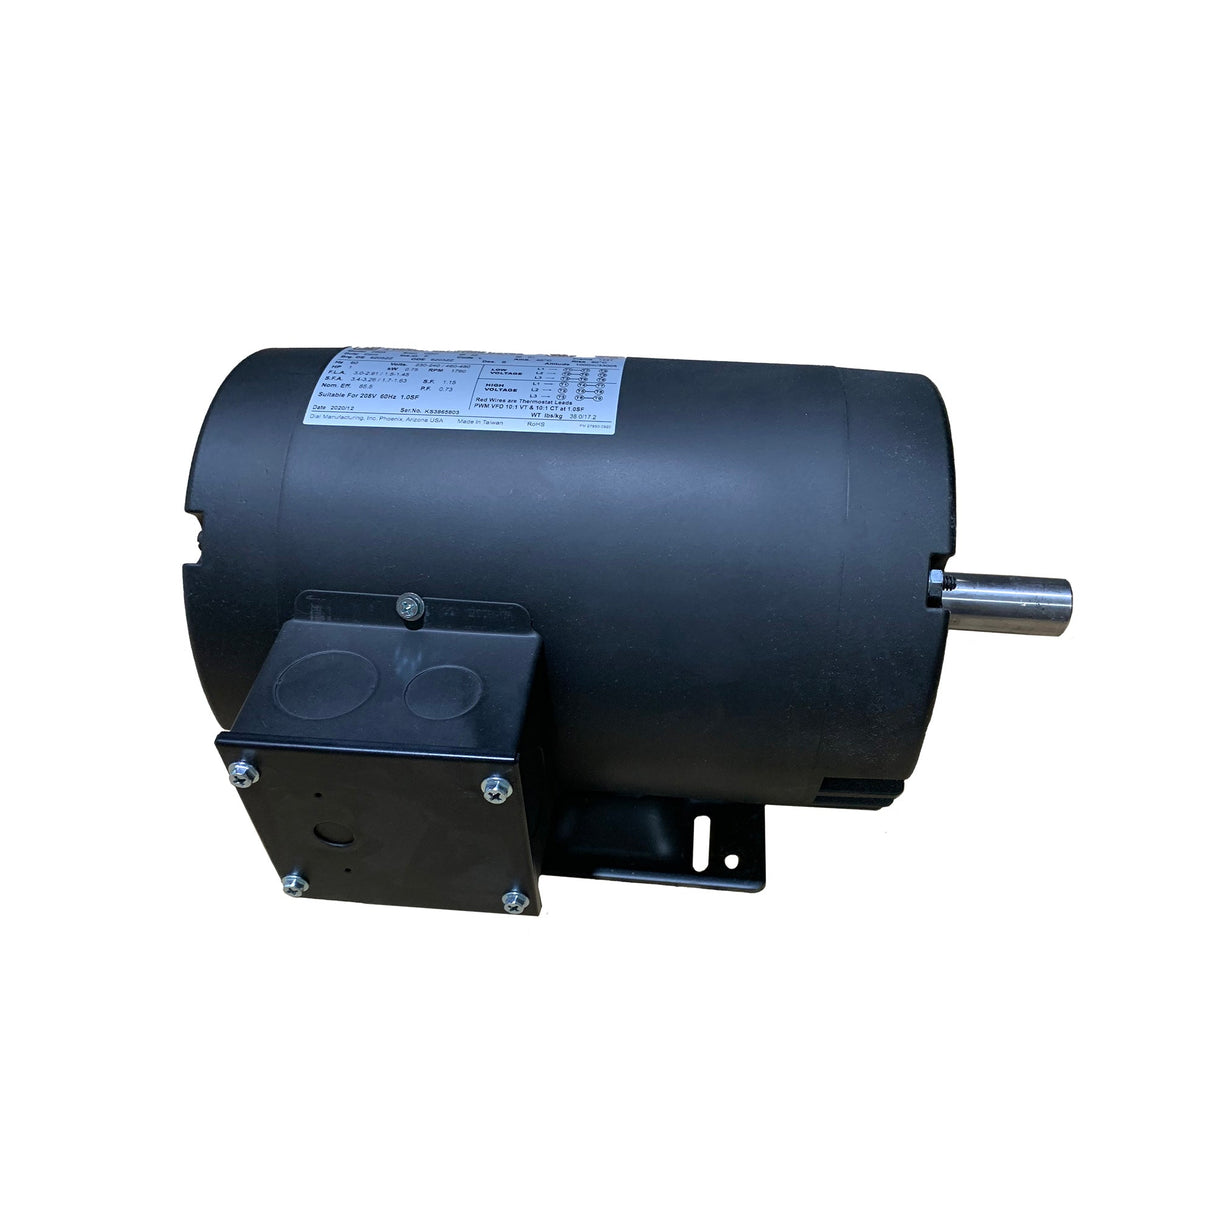 Dial Manufacturing 230/460V 1½ HP 3 Phase Industrial Motor